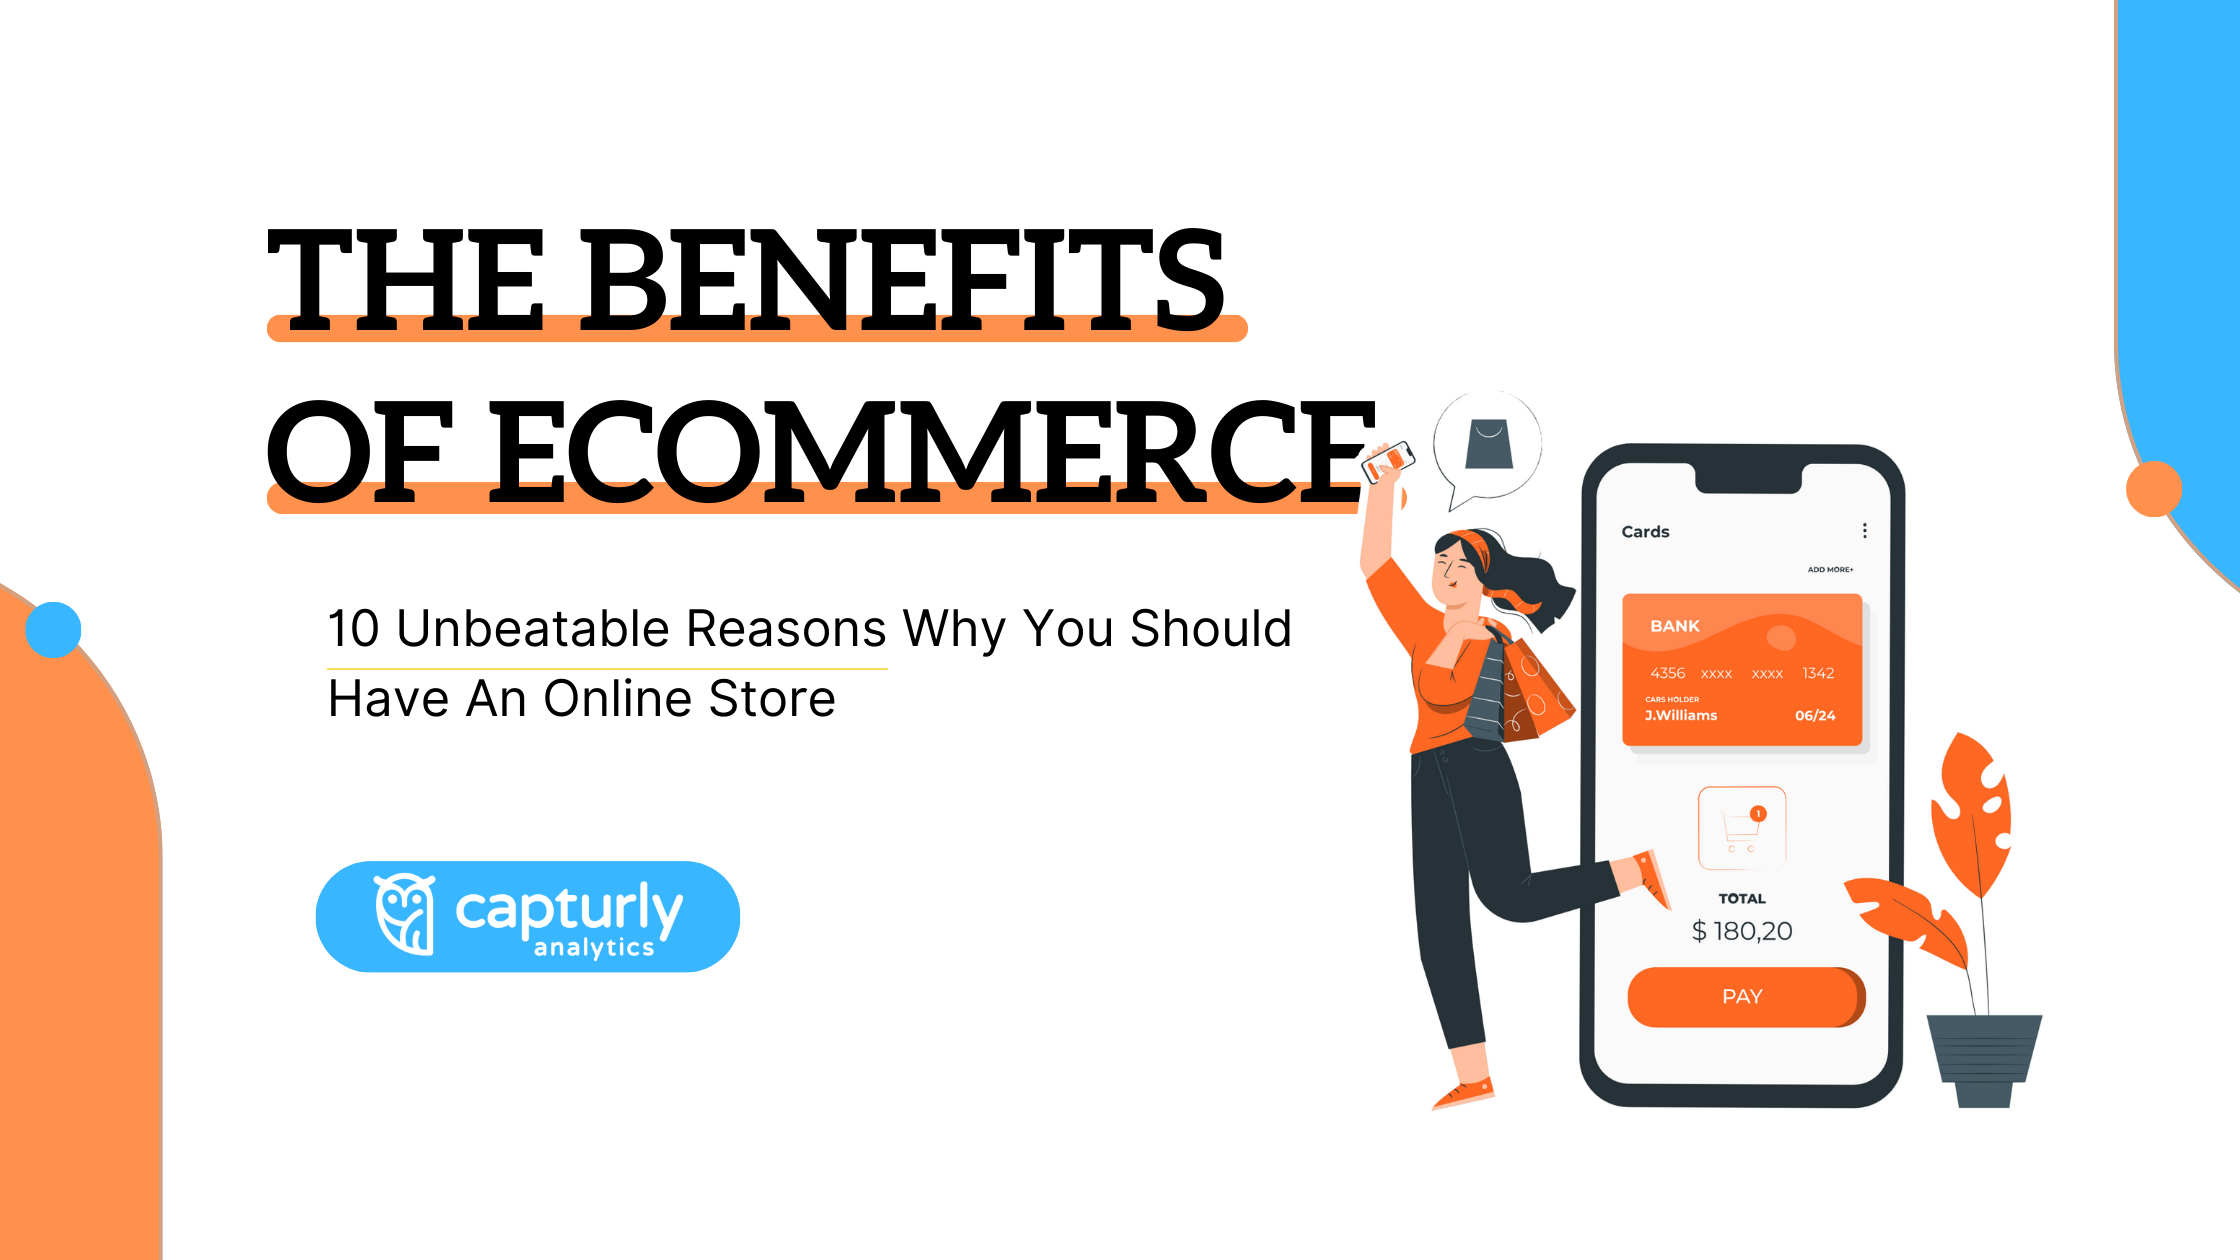 10 Reasons Ecommerce Is Superior to Physical Stores